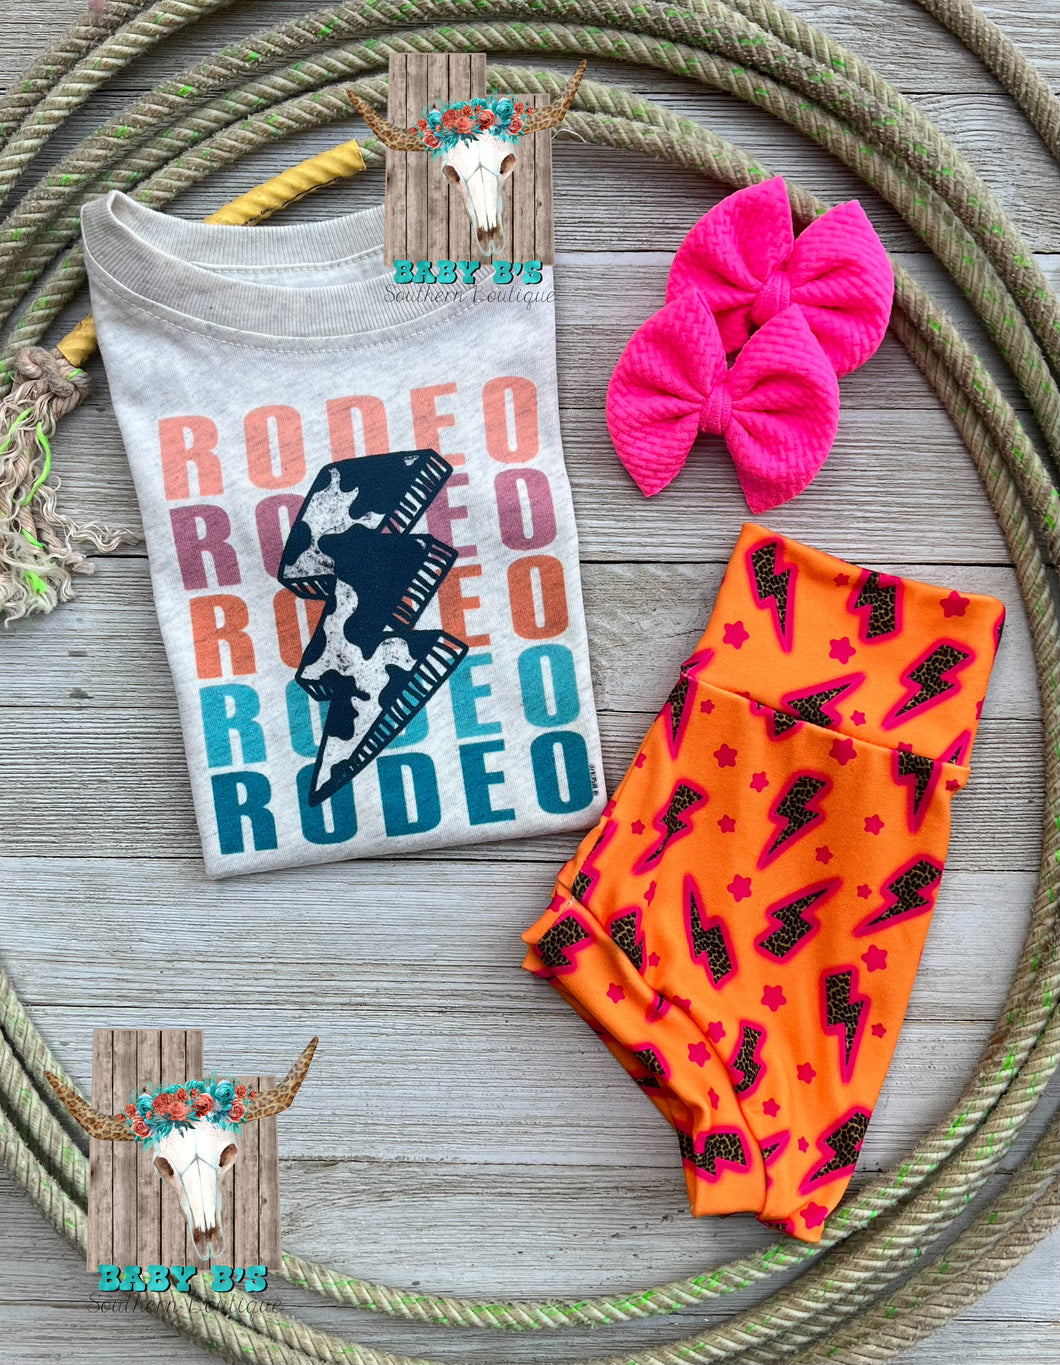 Rodeo Rodeo Rodeo Cow Thunderbolt T-Shirt